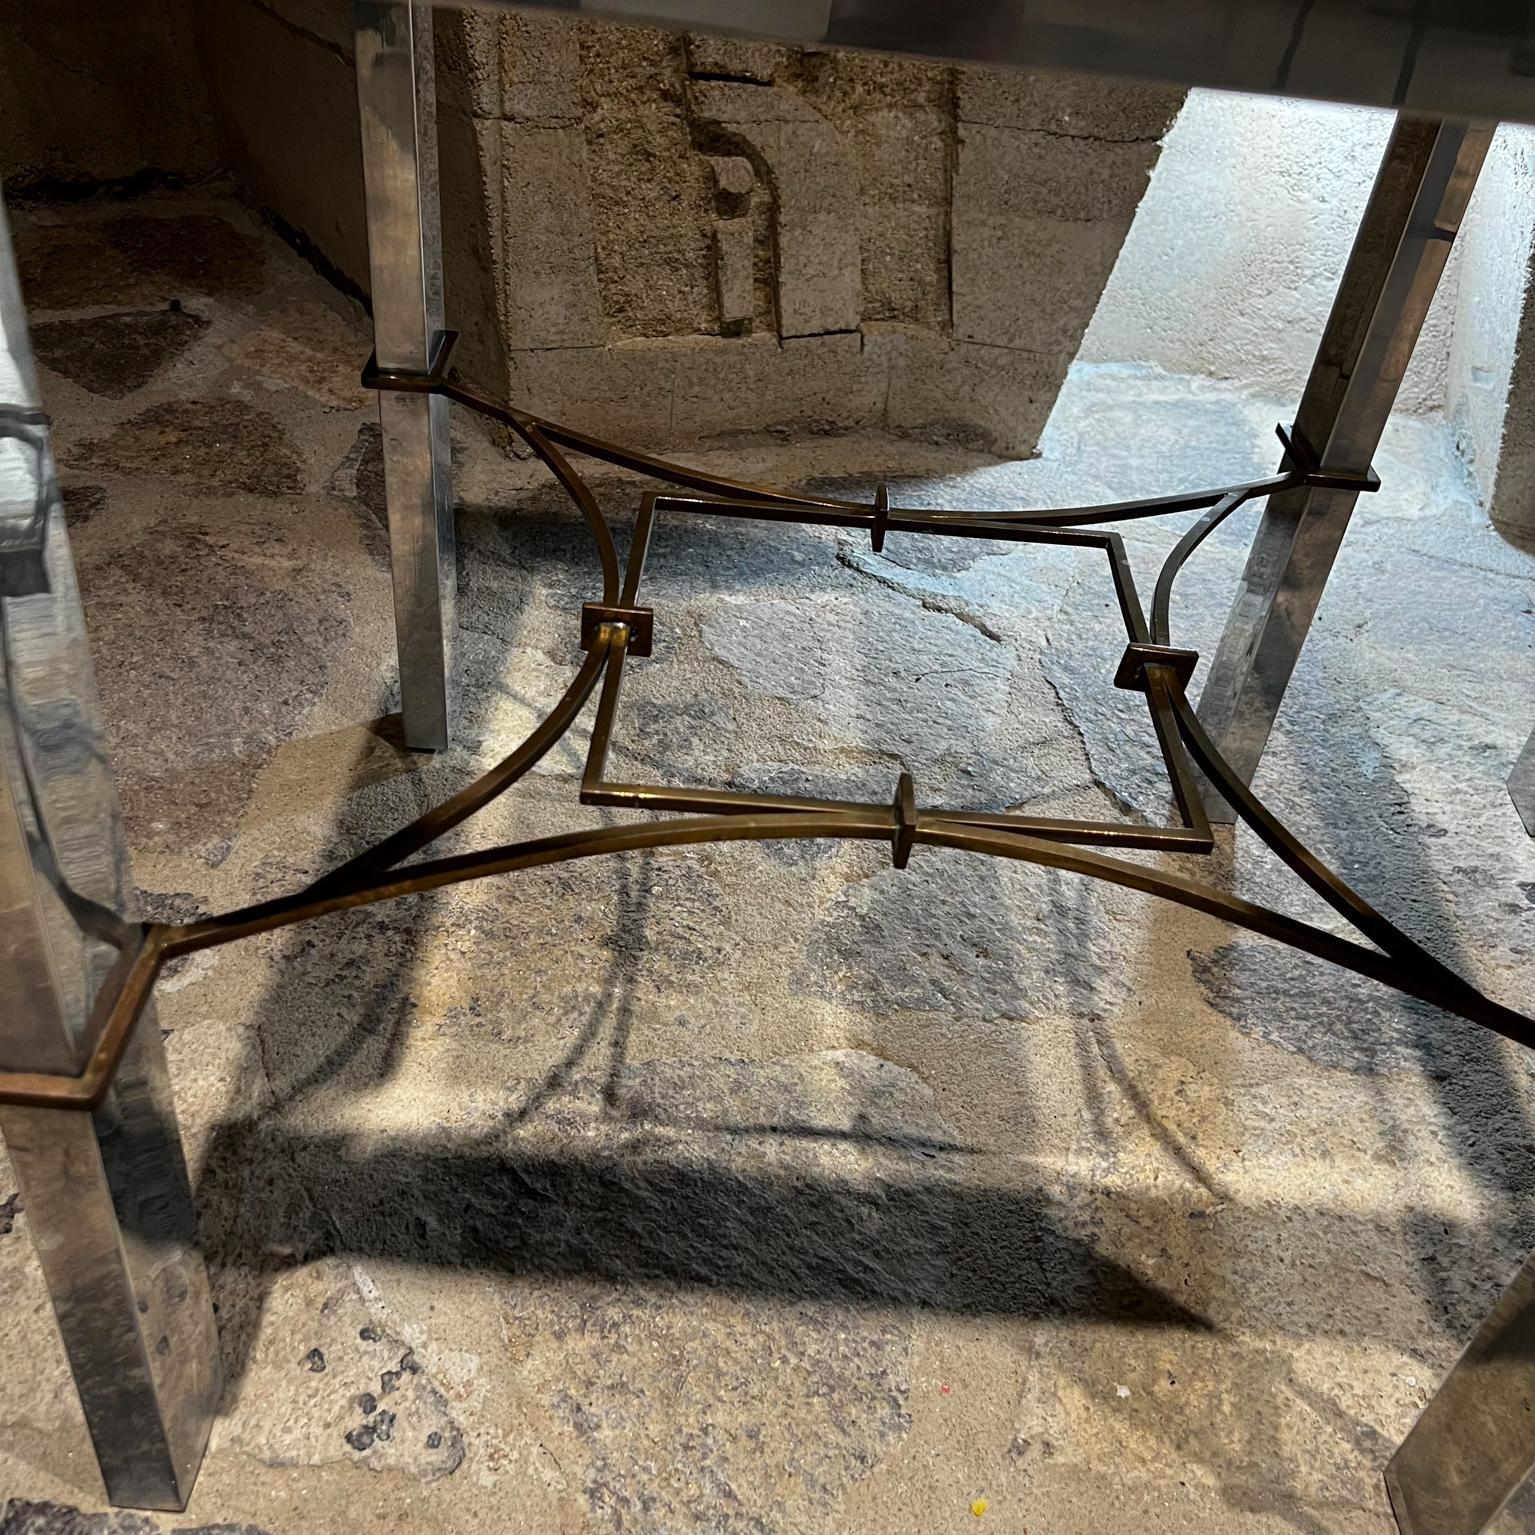 1960s Arturo Pani Modern Side Tables Aluminum and Bronze Mexico City For Sale 2